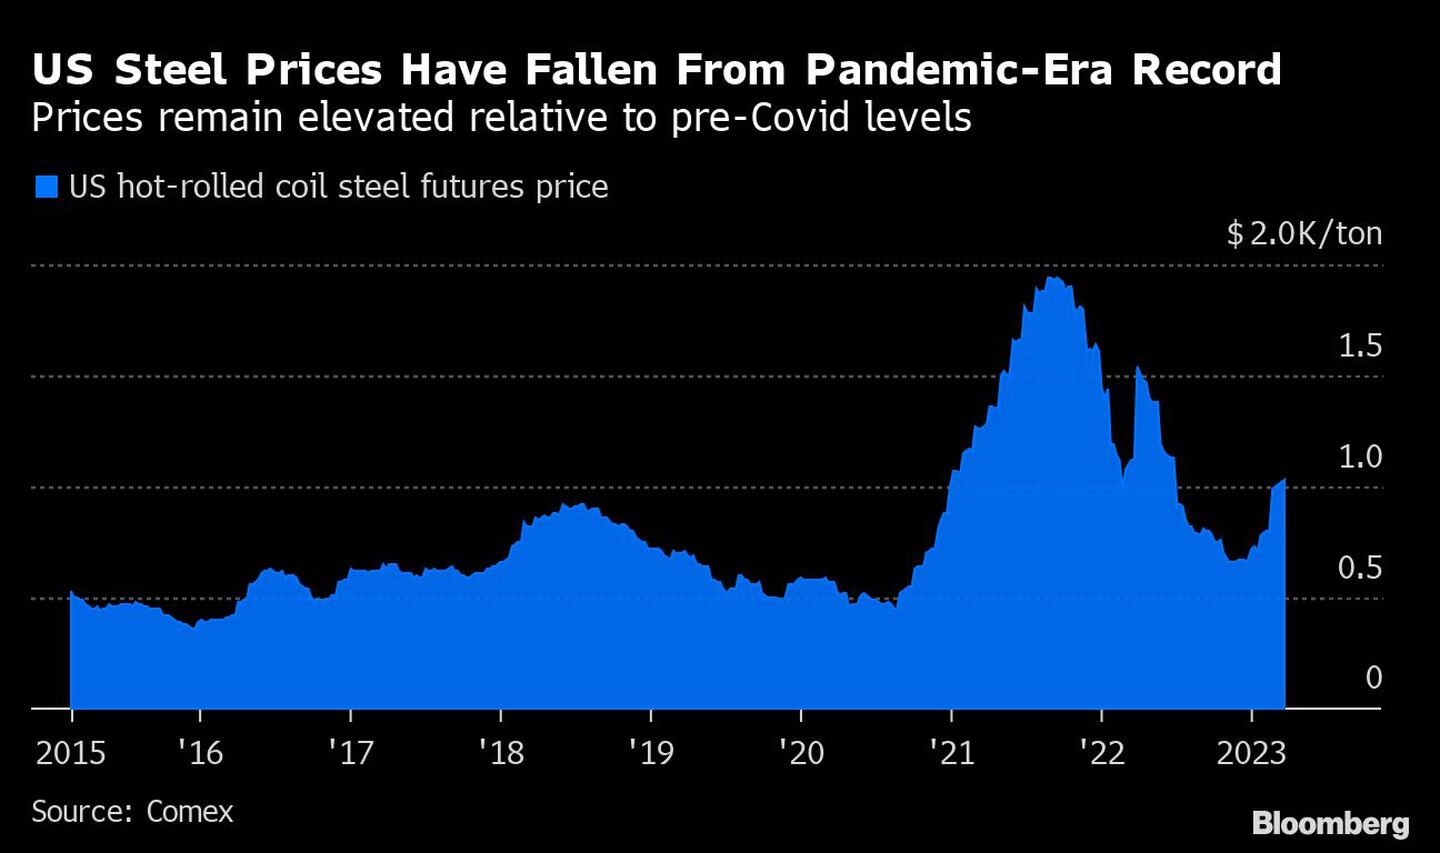 US Steel Prices Have Fallen From Pandemic-Era Record | Prices remain elevated relative to pre-Covid levelsdfd